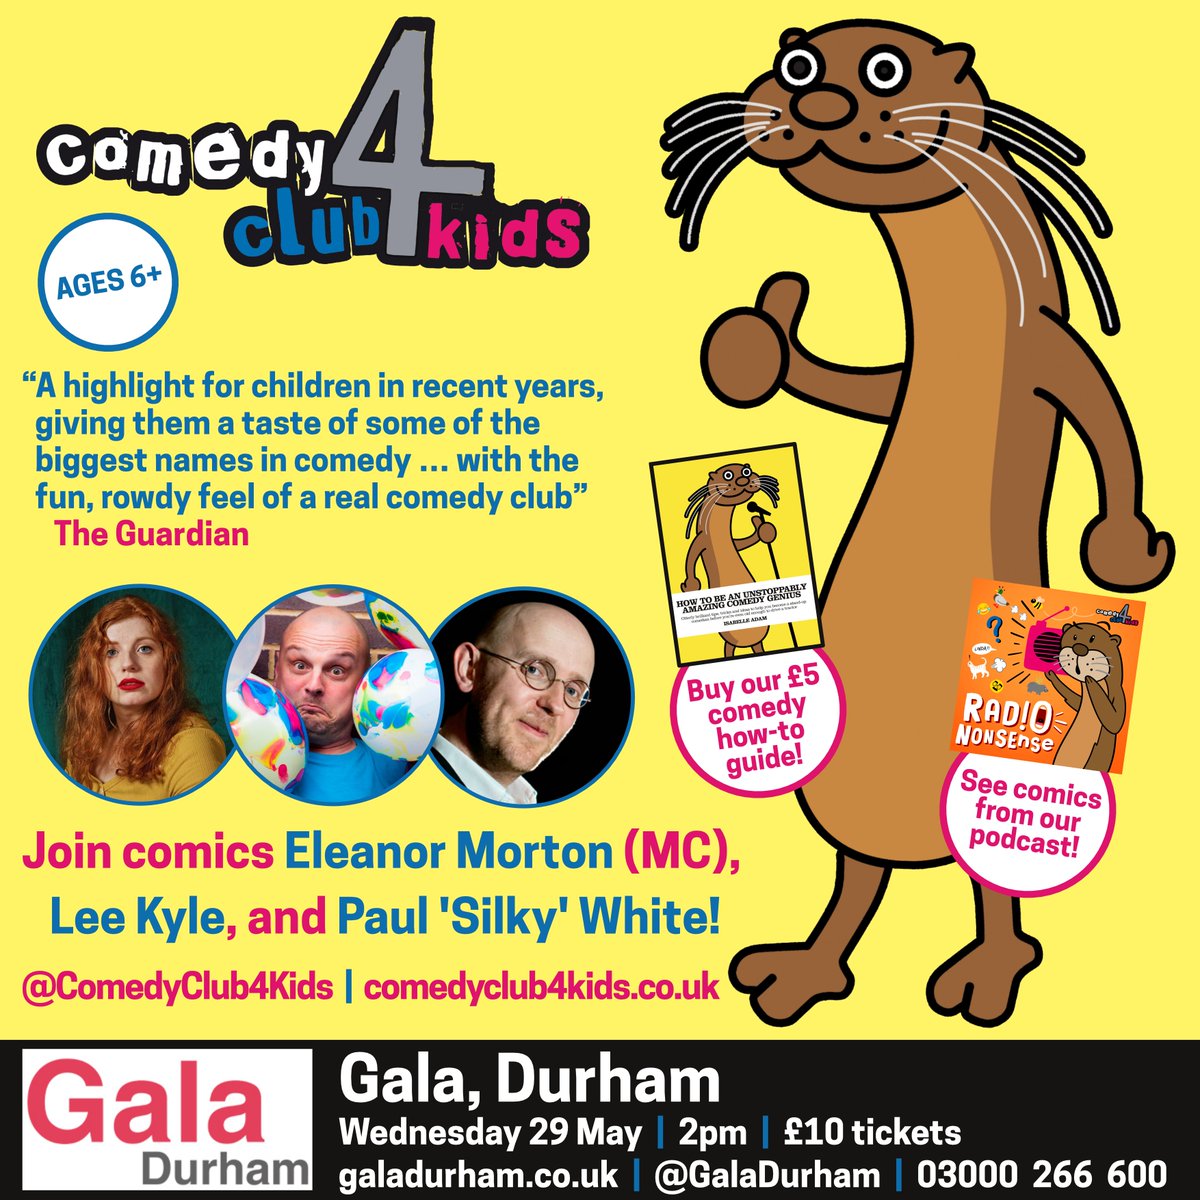 Durham! KIDS! We're bringing #familyfriendly stand-up and top-level silliness to @GalaDurham on Wednesday 29th May: join us to see @EleanorMorton, @ImLeeKyle and @paulsilkywhite! 🎟️galadurham.co.uk/galapost/comed…